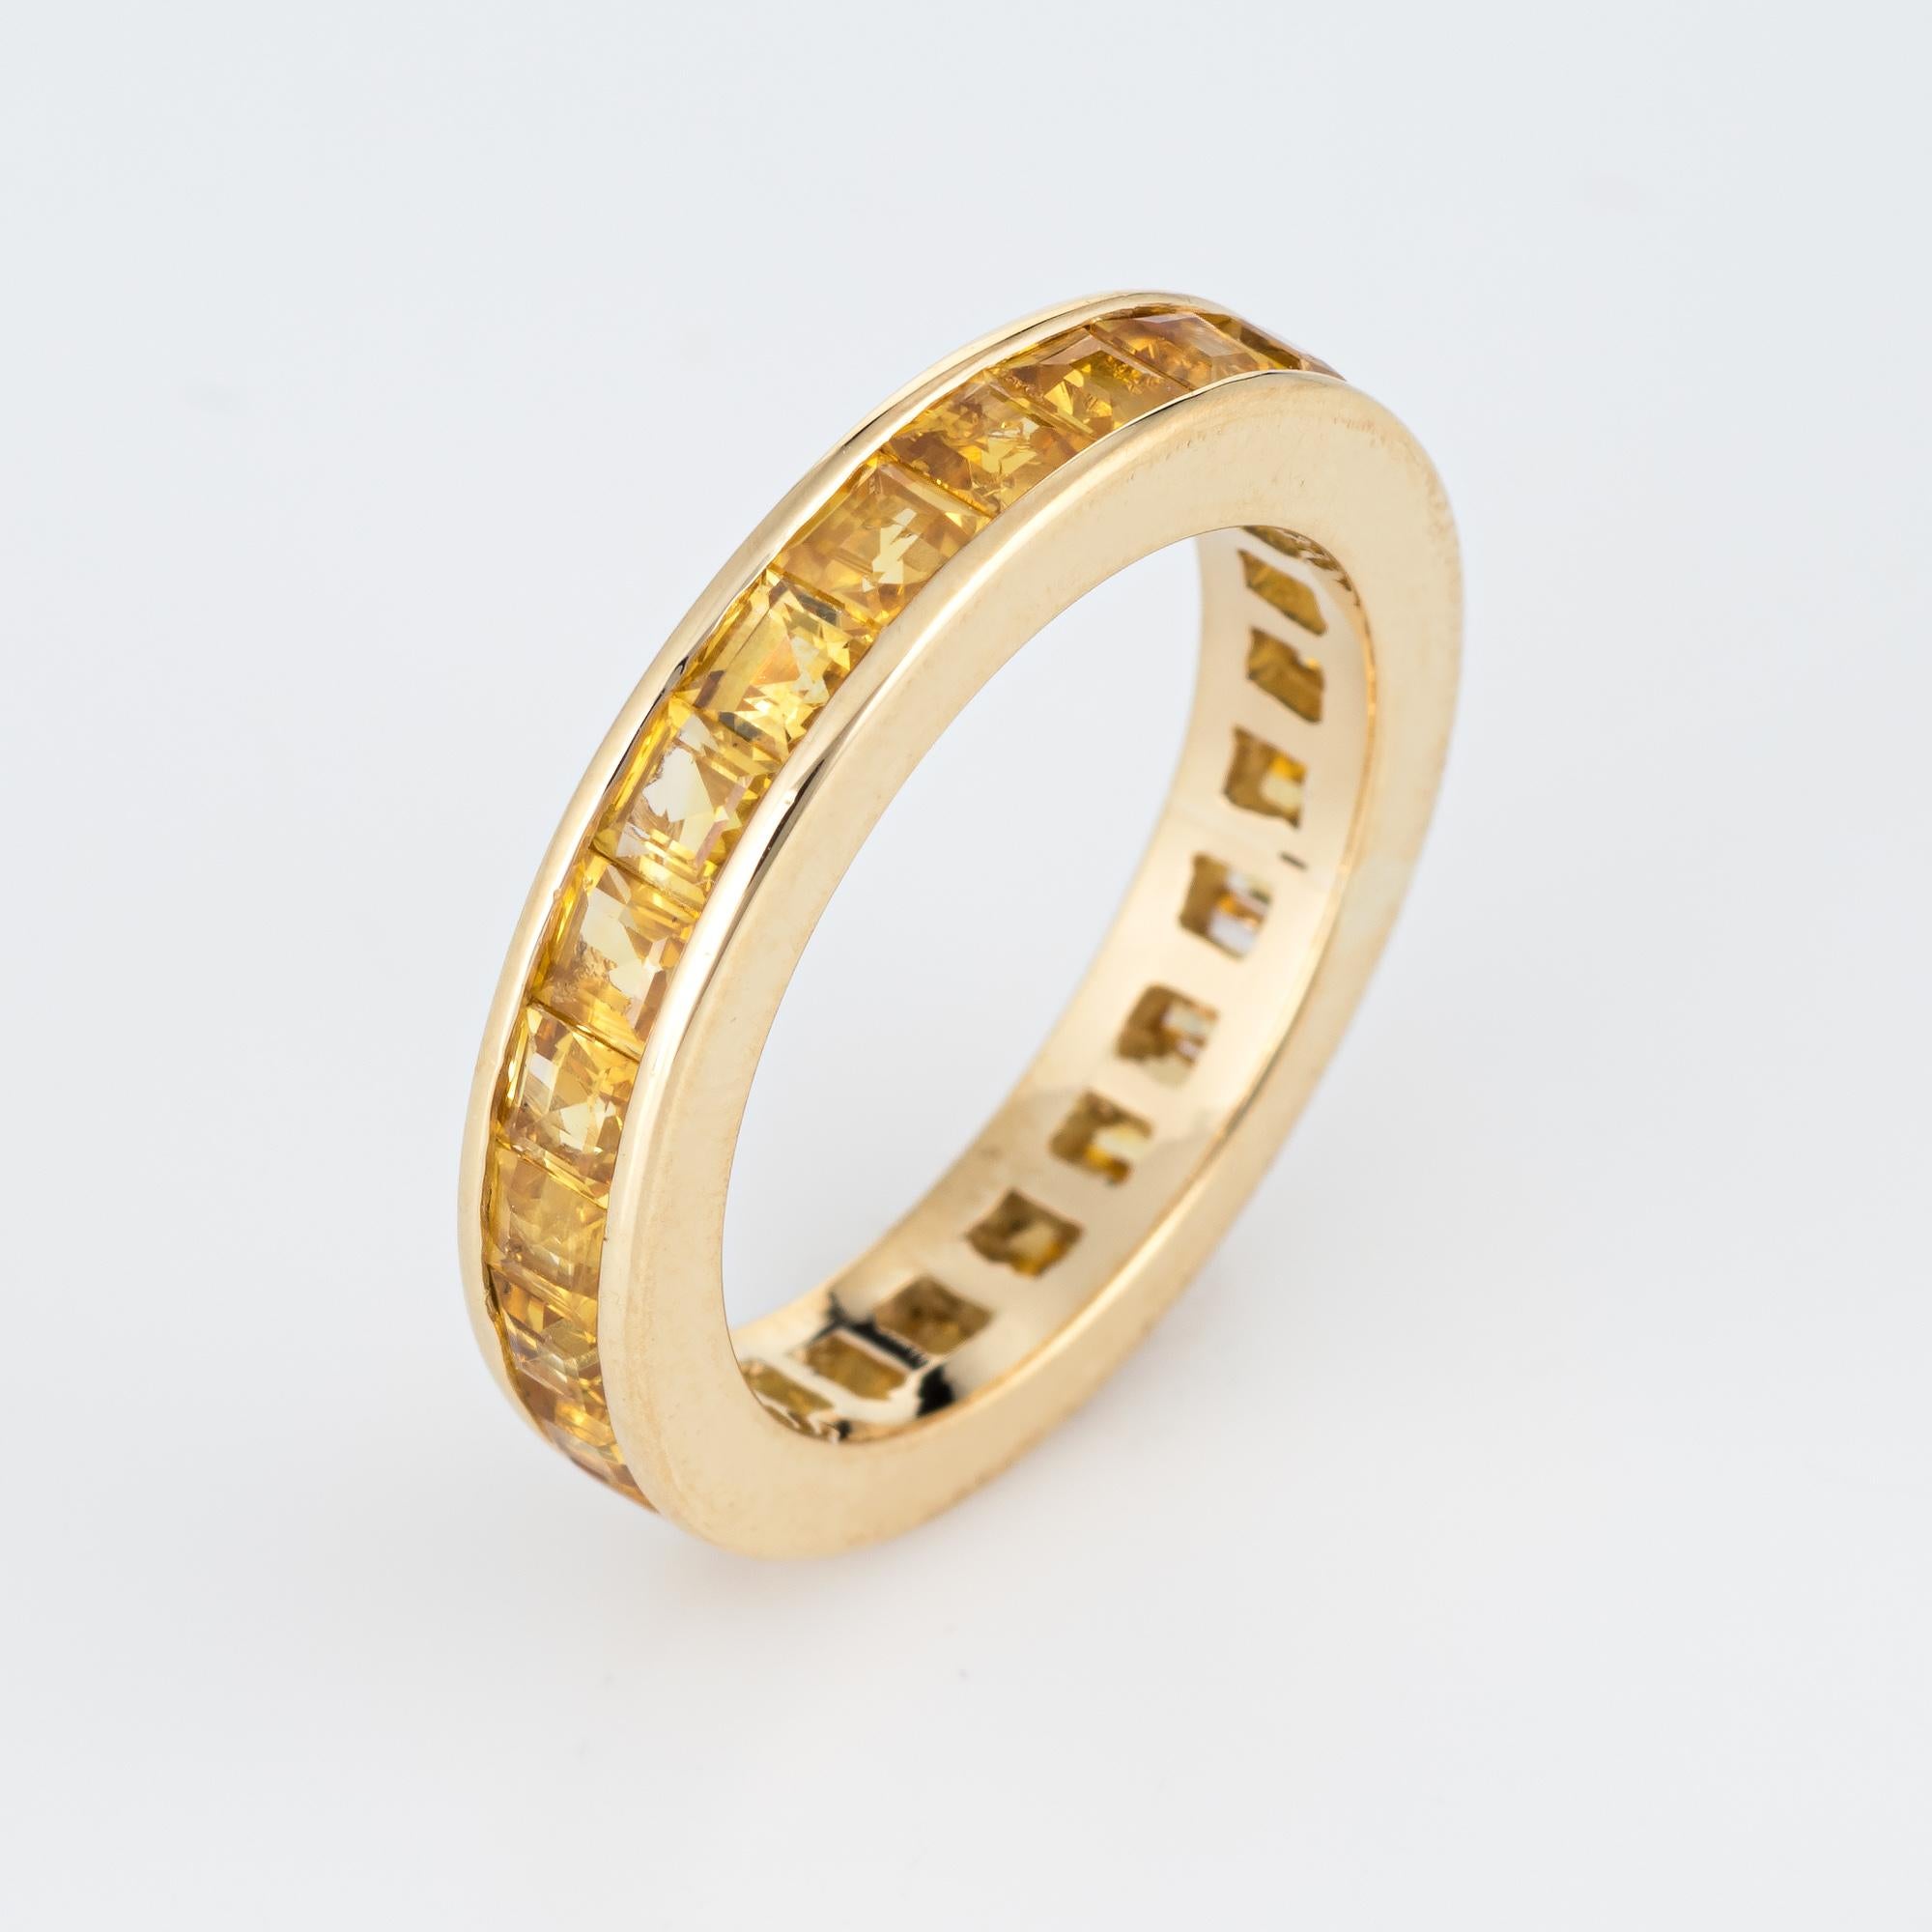 Elegant estate yellow sapphire eternity band crafted in 18 karat yellow gold. 

24 square emerald cut yellow sapphires are estimated at 0.10 carats each, totaling an estimated 2.40 carats. The sapphires are in excellent condition and free or cracks